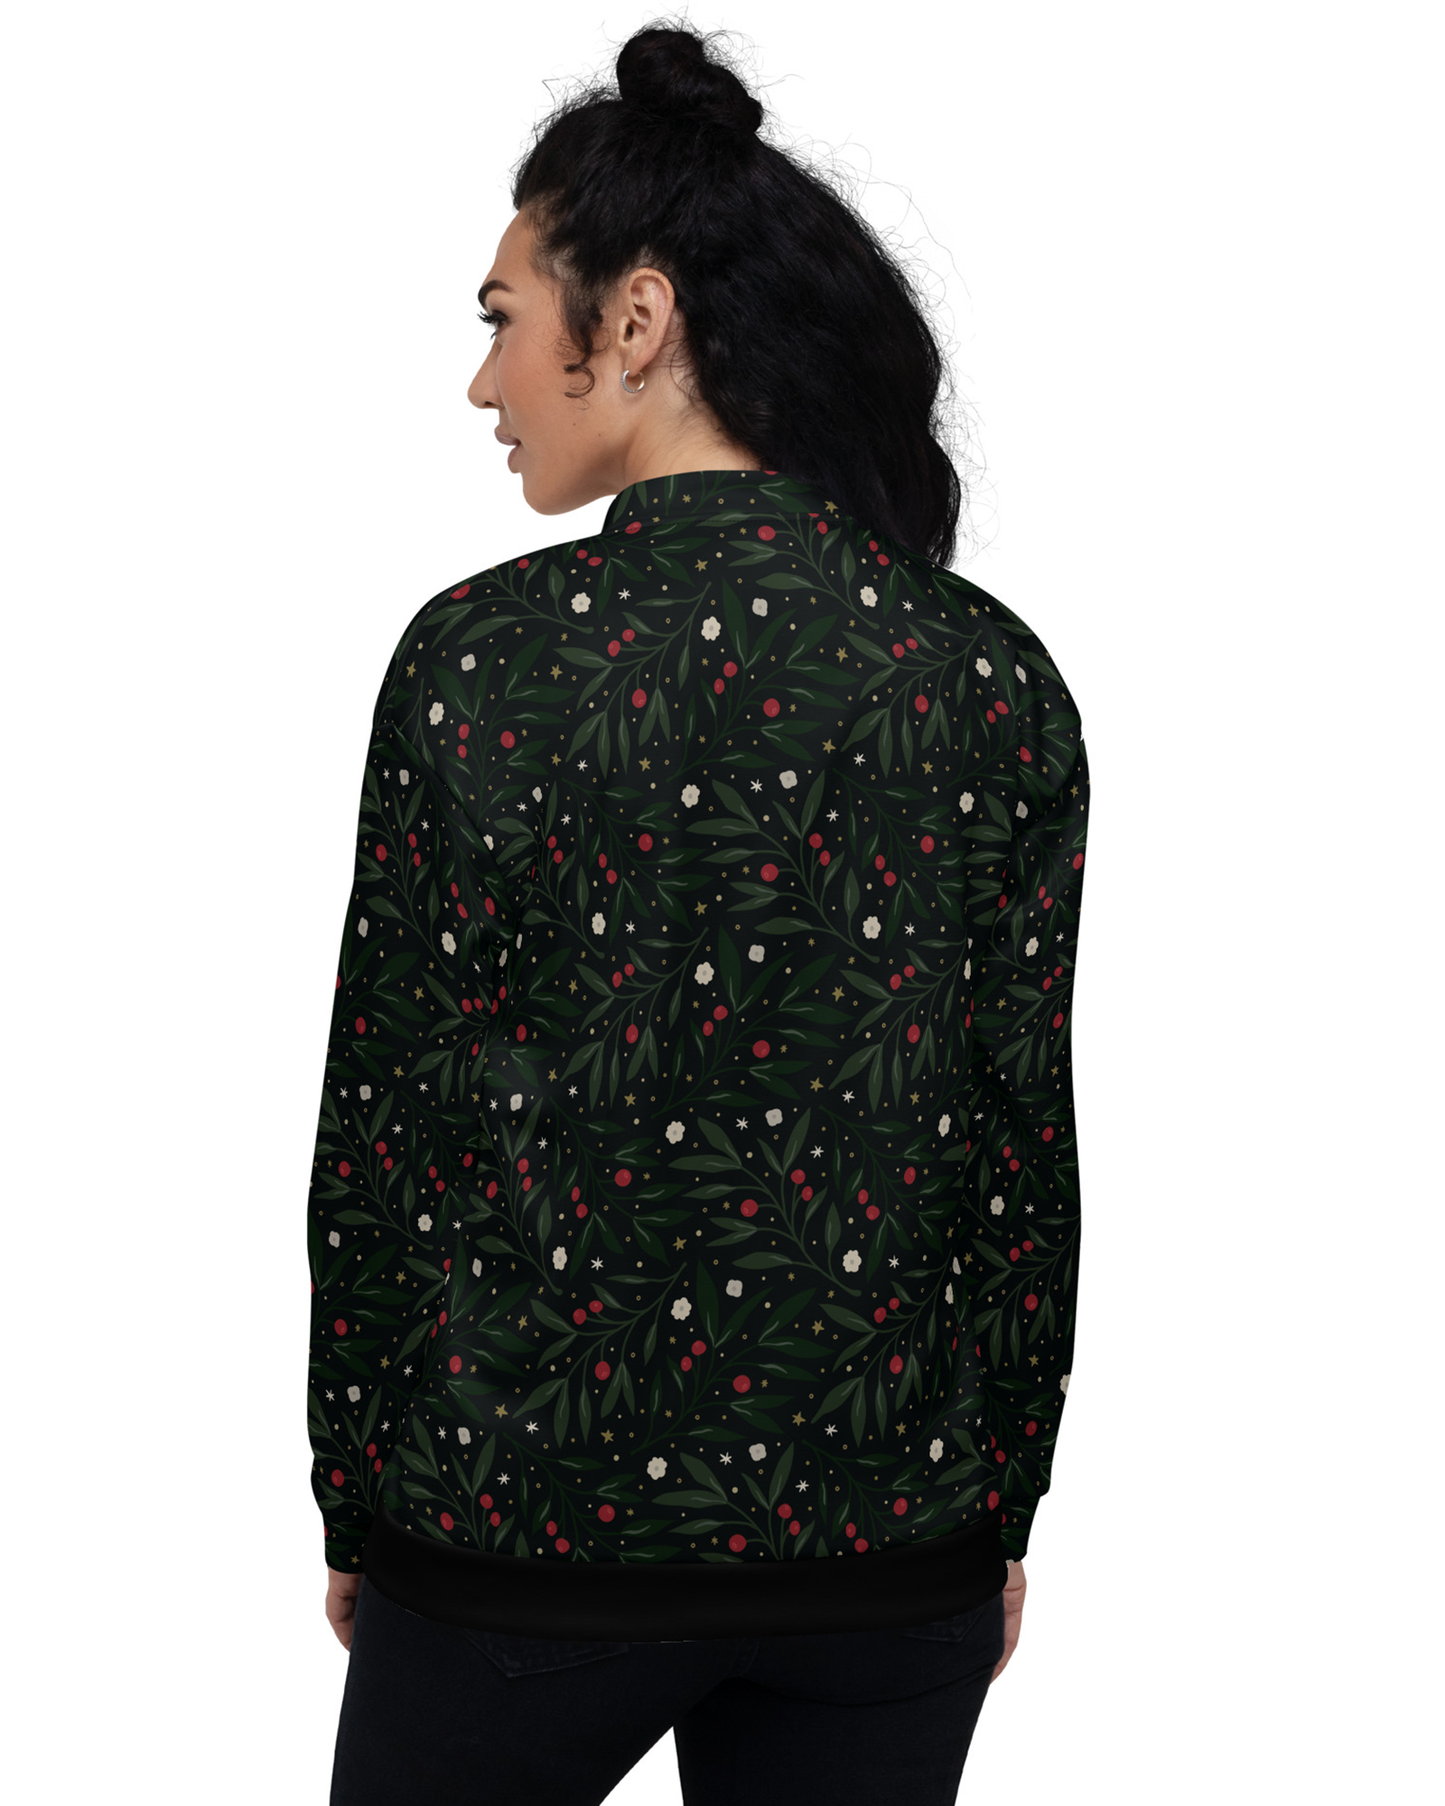 Nocturnal Holly Bomber Jacket